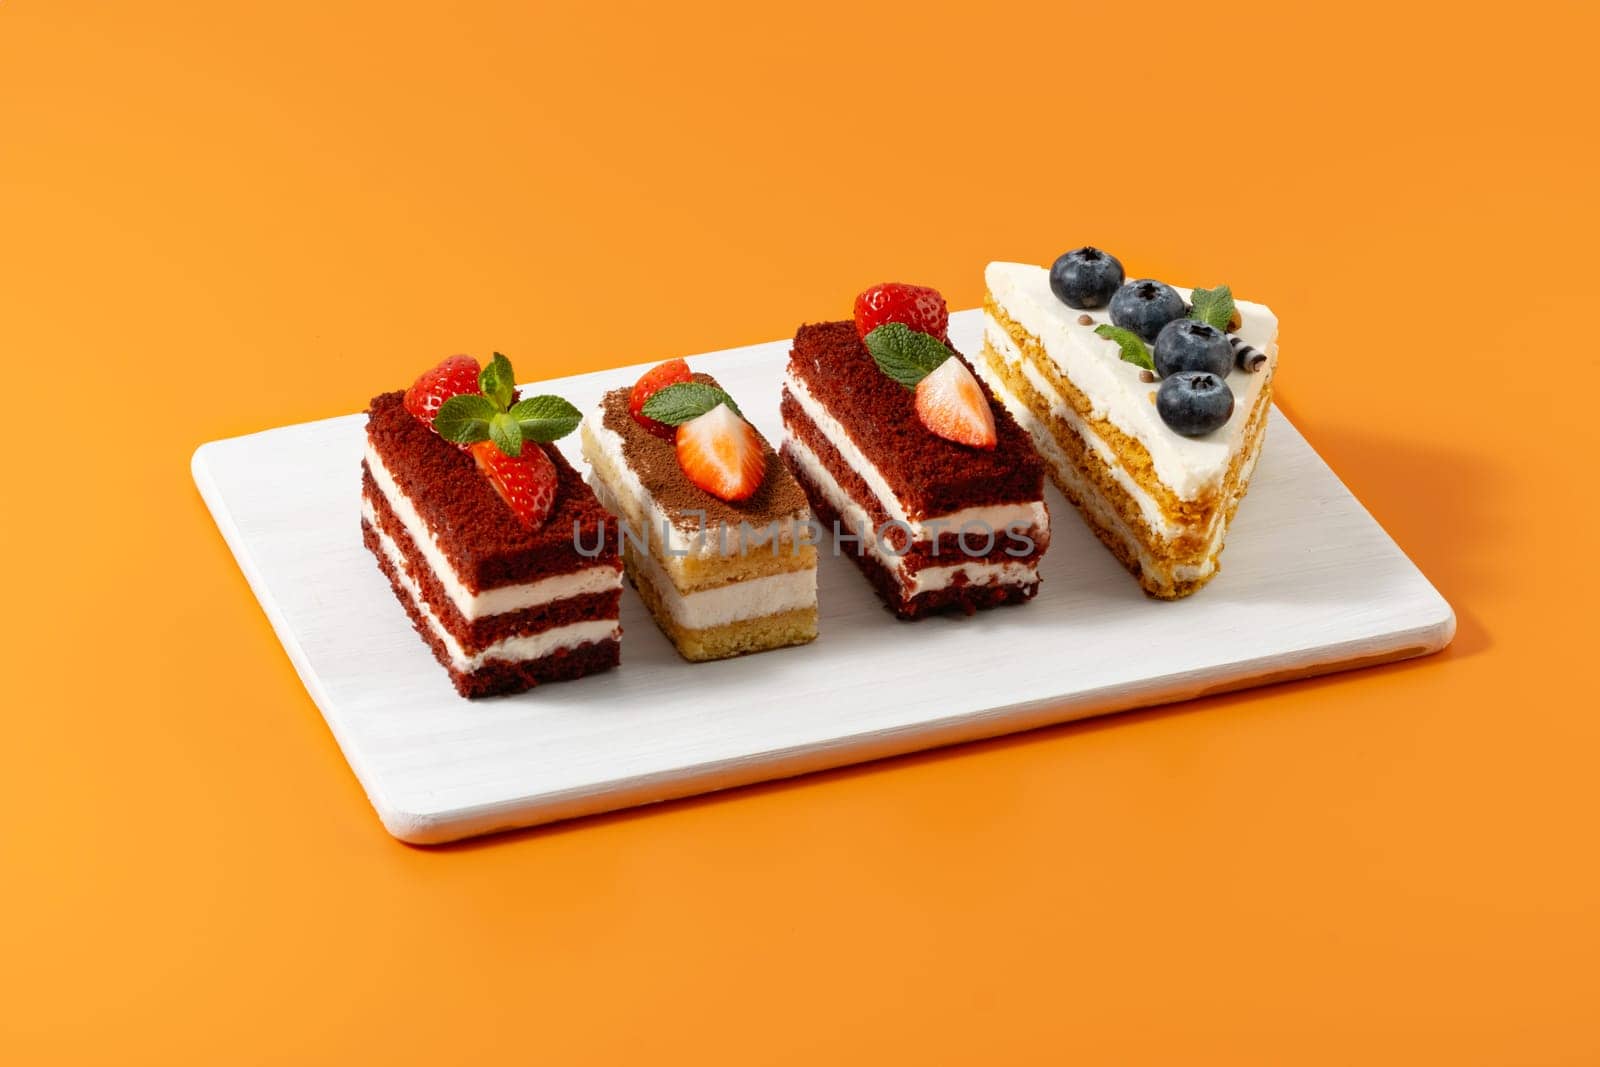 Strawberry and blueberry cakes on an orange background.